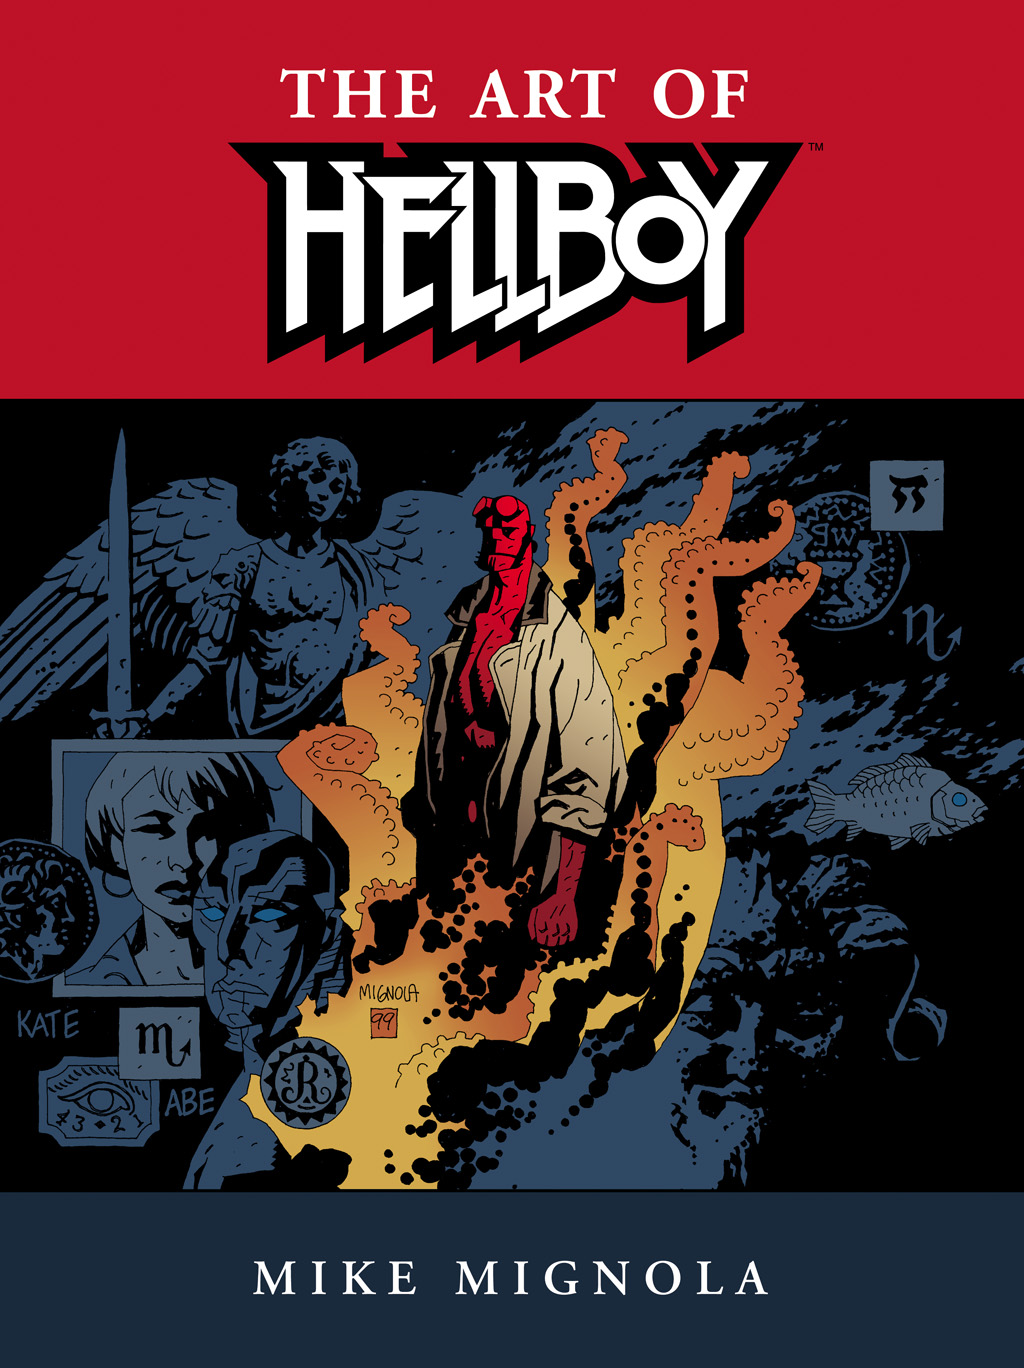 Read online The Art of Hellboy comic -  Issue # TPB - 1